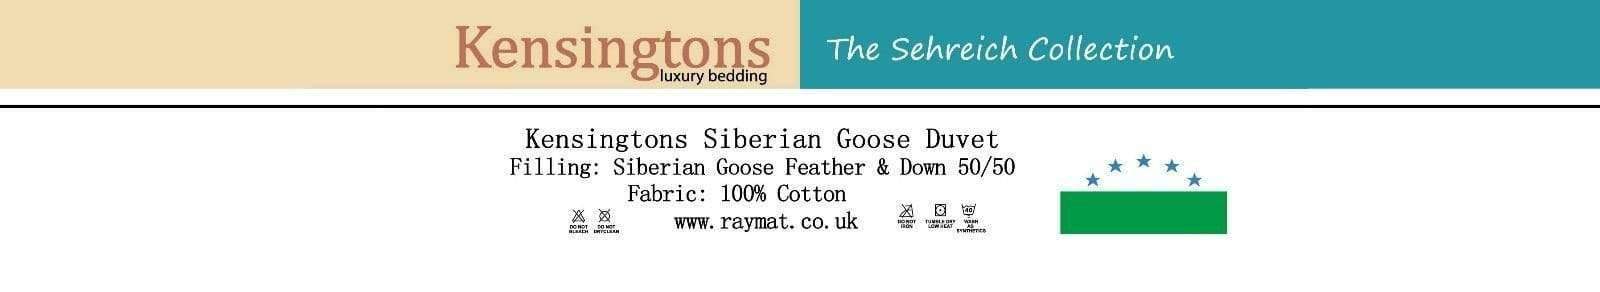 Super-Soft-Siberian-Goose-Feather-&-Down-Double-Bed-Duvet